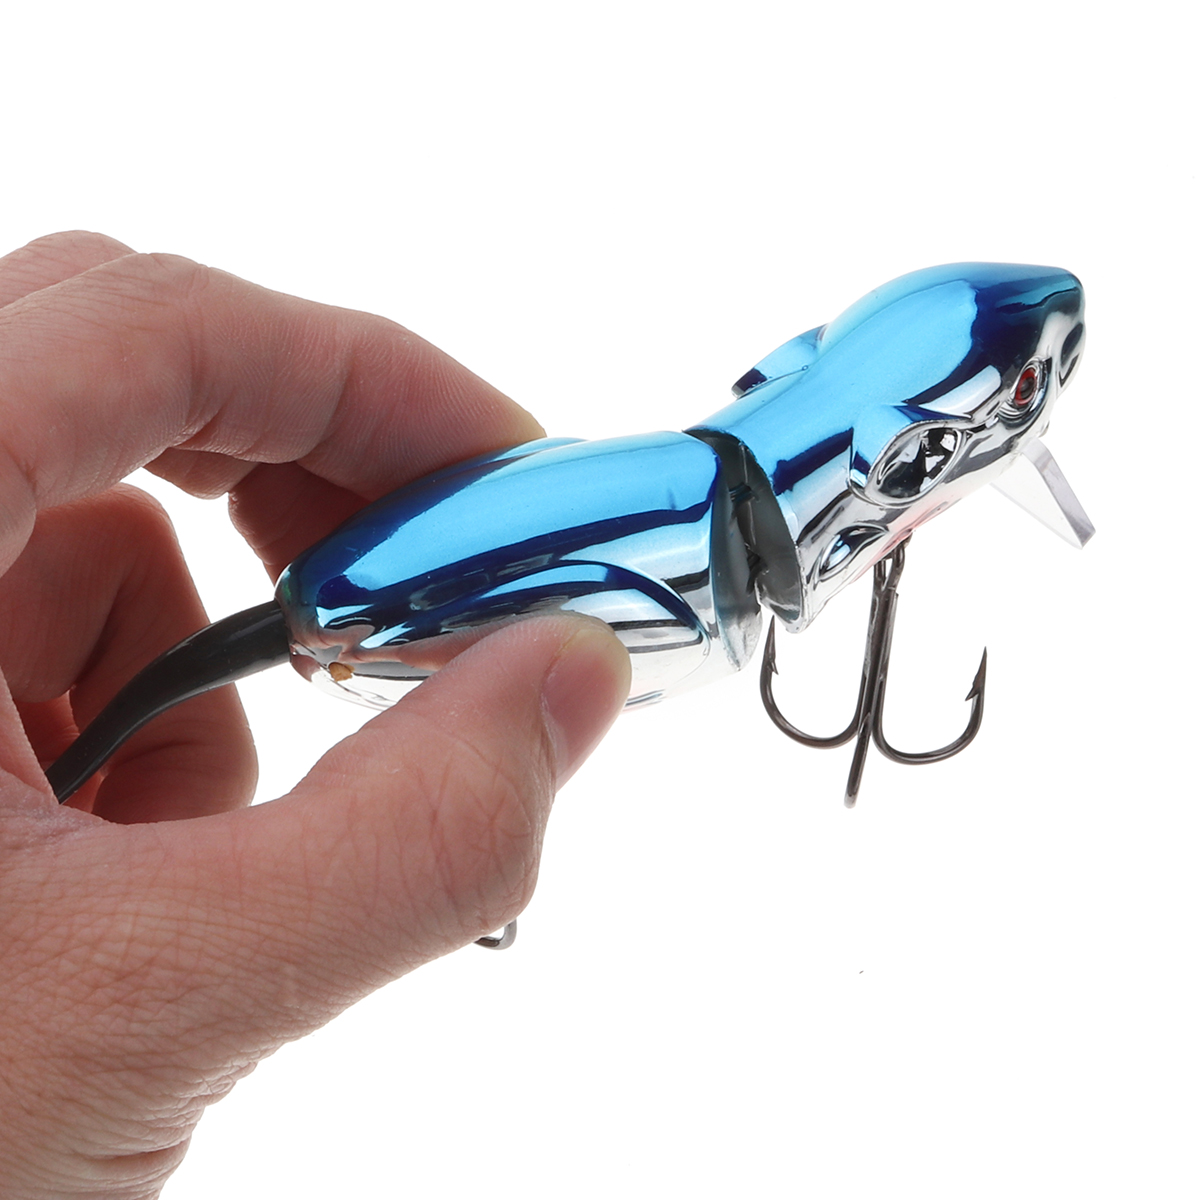 ZANLURE-1PC-16CM-45g-3D-Eyes-Mice-Rat-Shape-Lure-Artificial-Fishing-Bait-With-2-Hooks-Fishing-Tackle-1646066-9